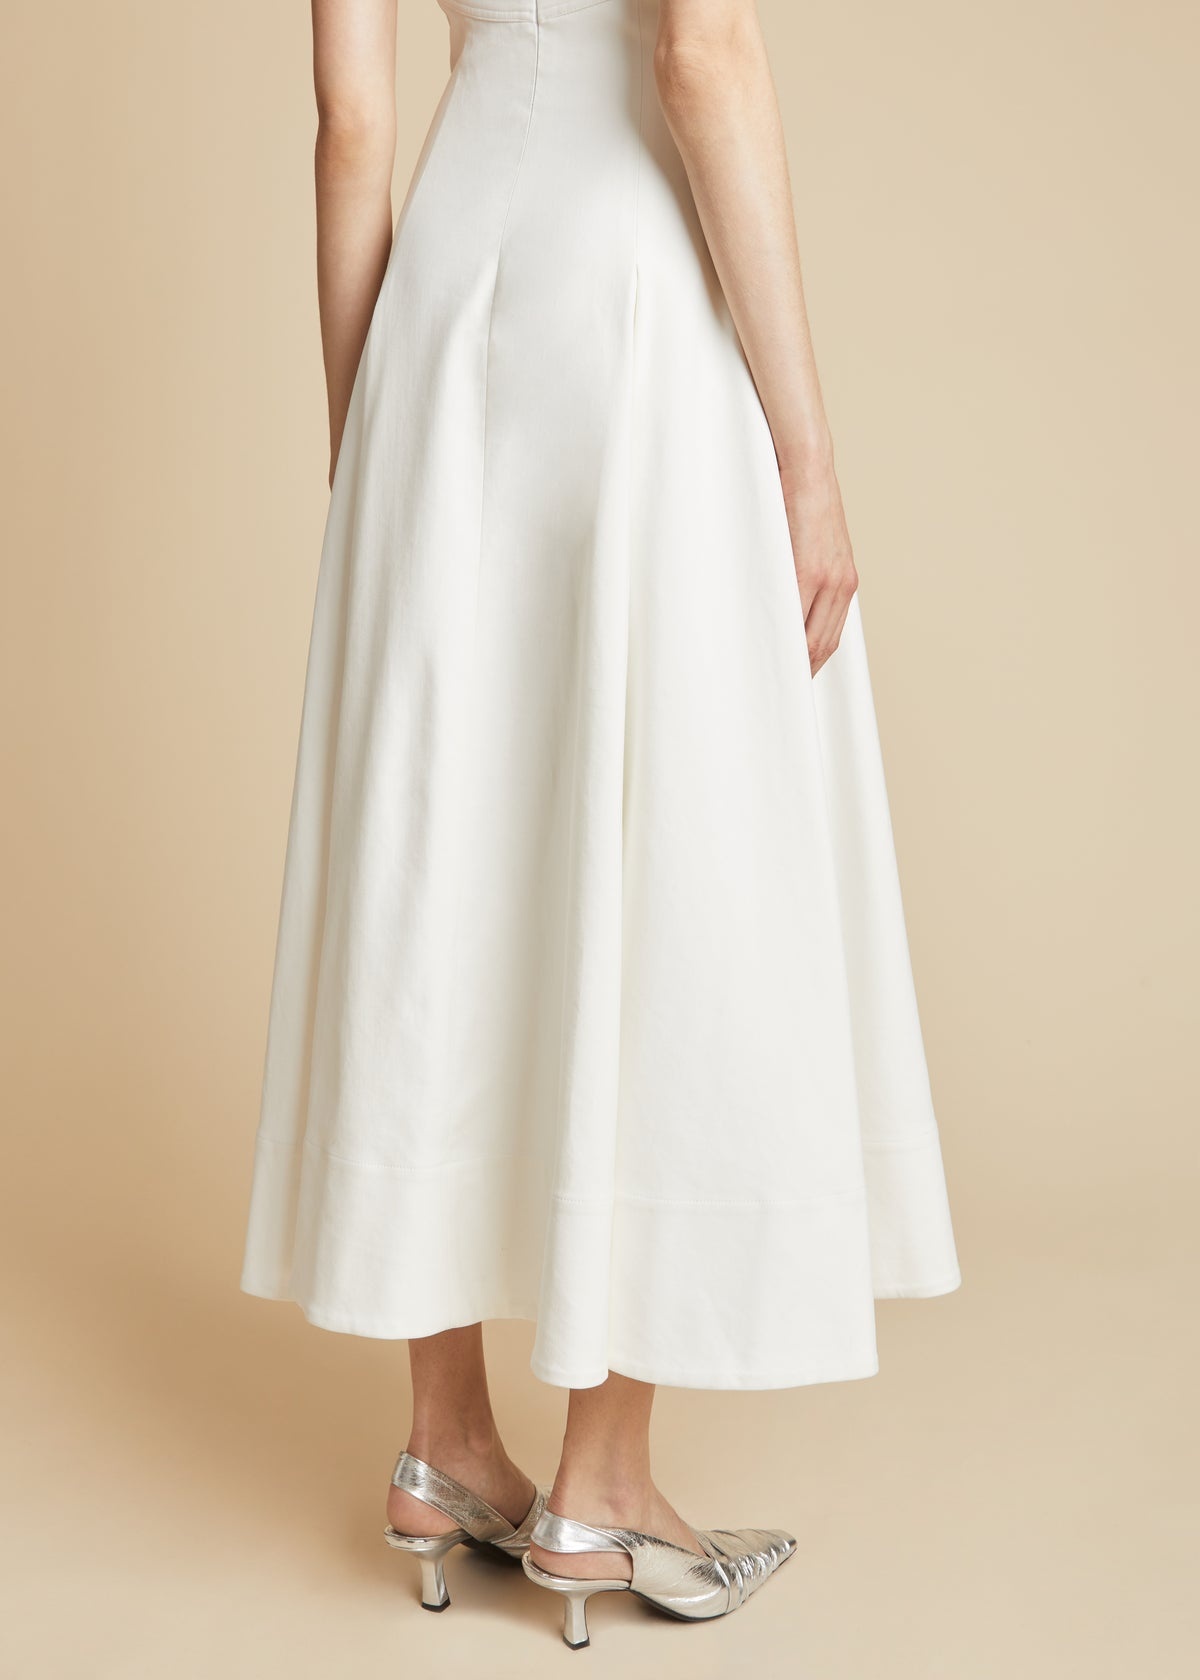 The Lalita Dress in White - 4